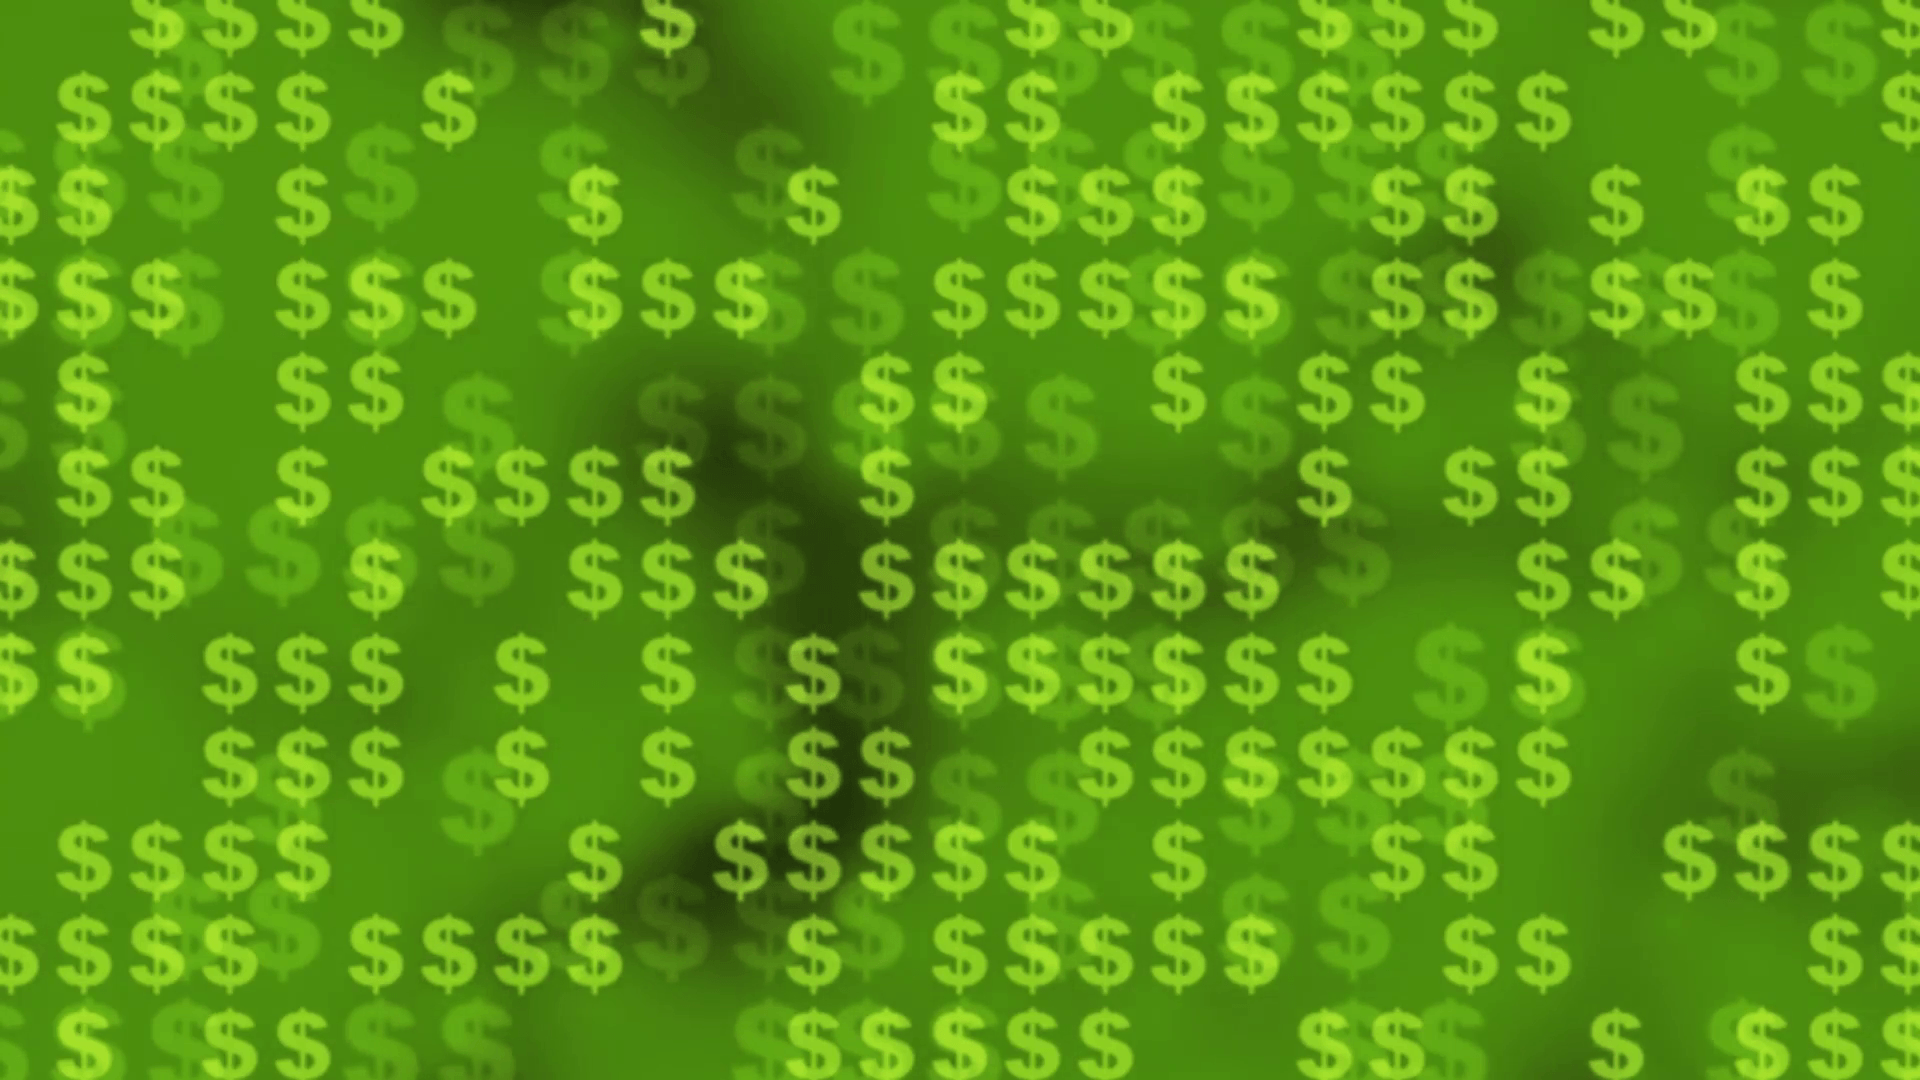 Small Green Dollar Signs Motion Background